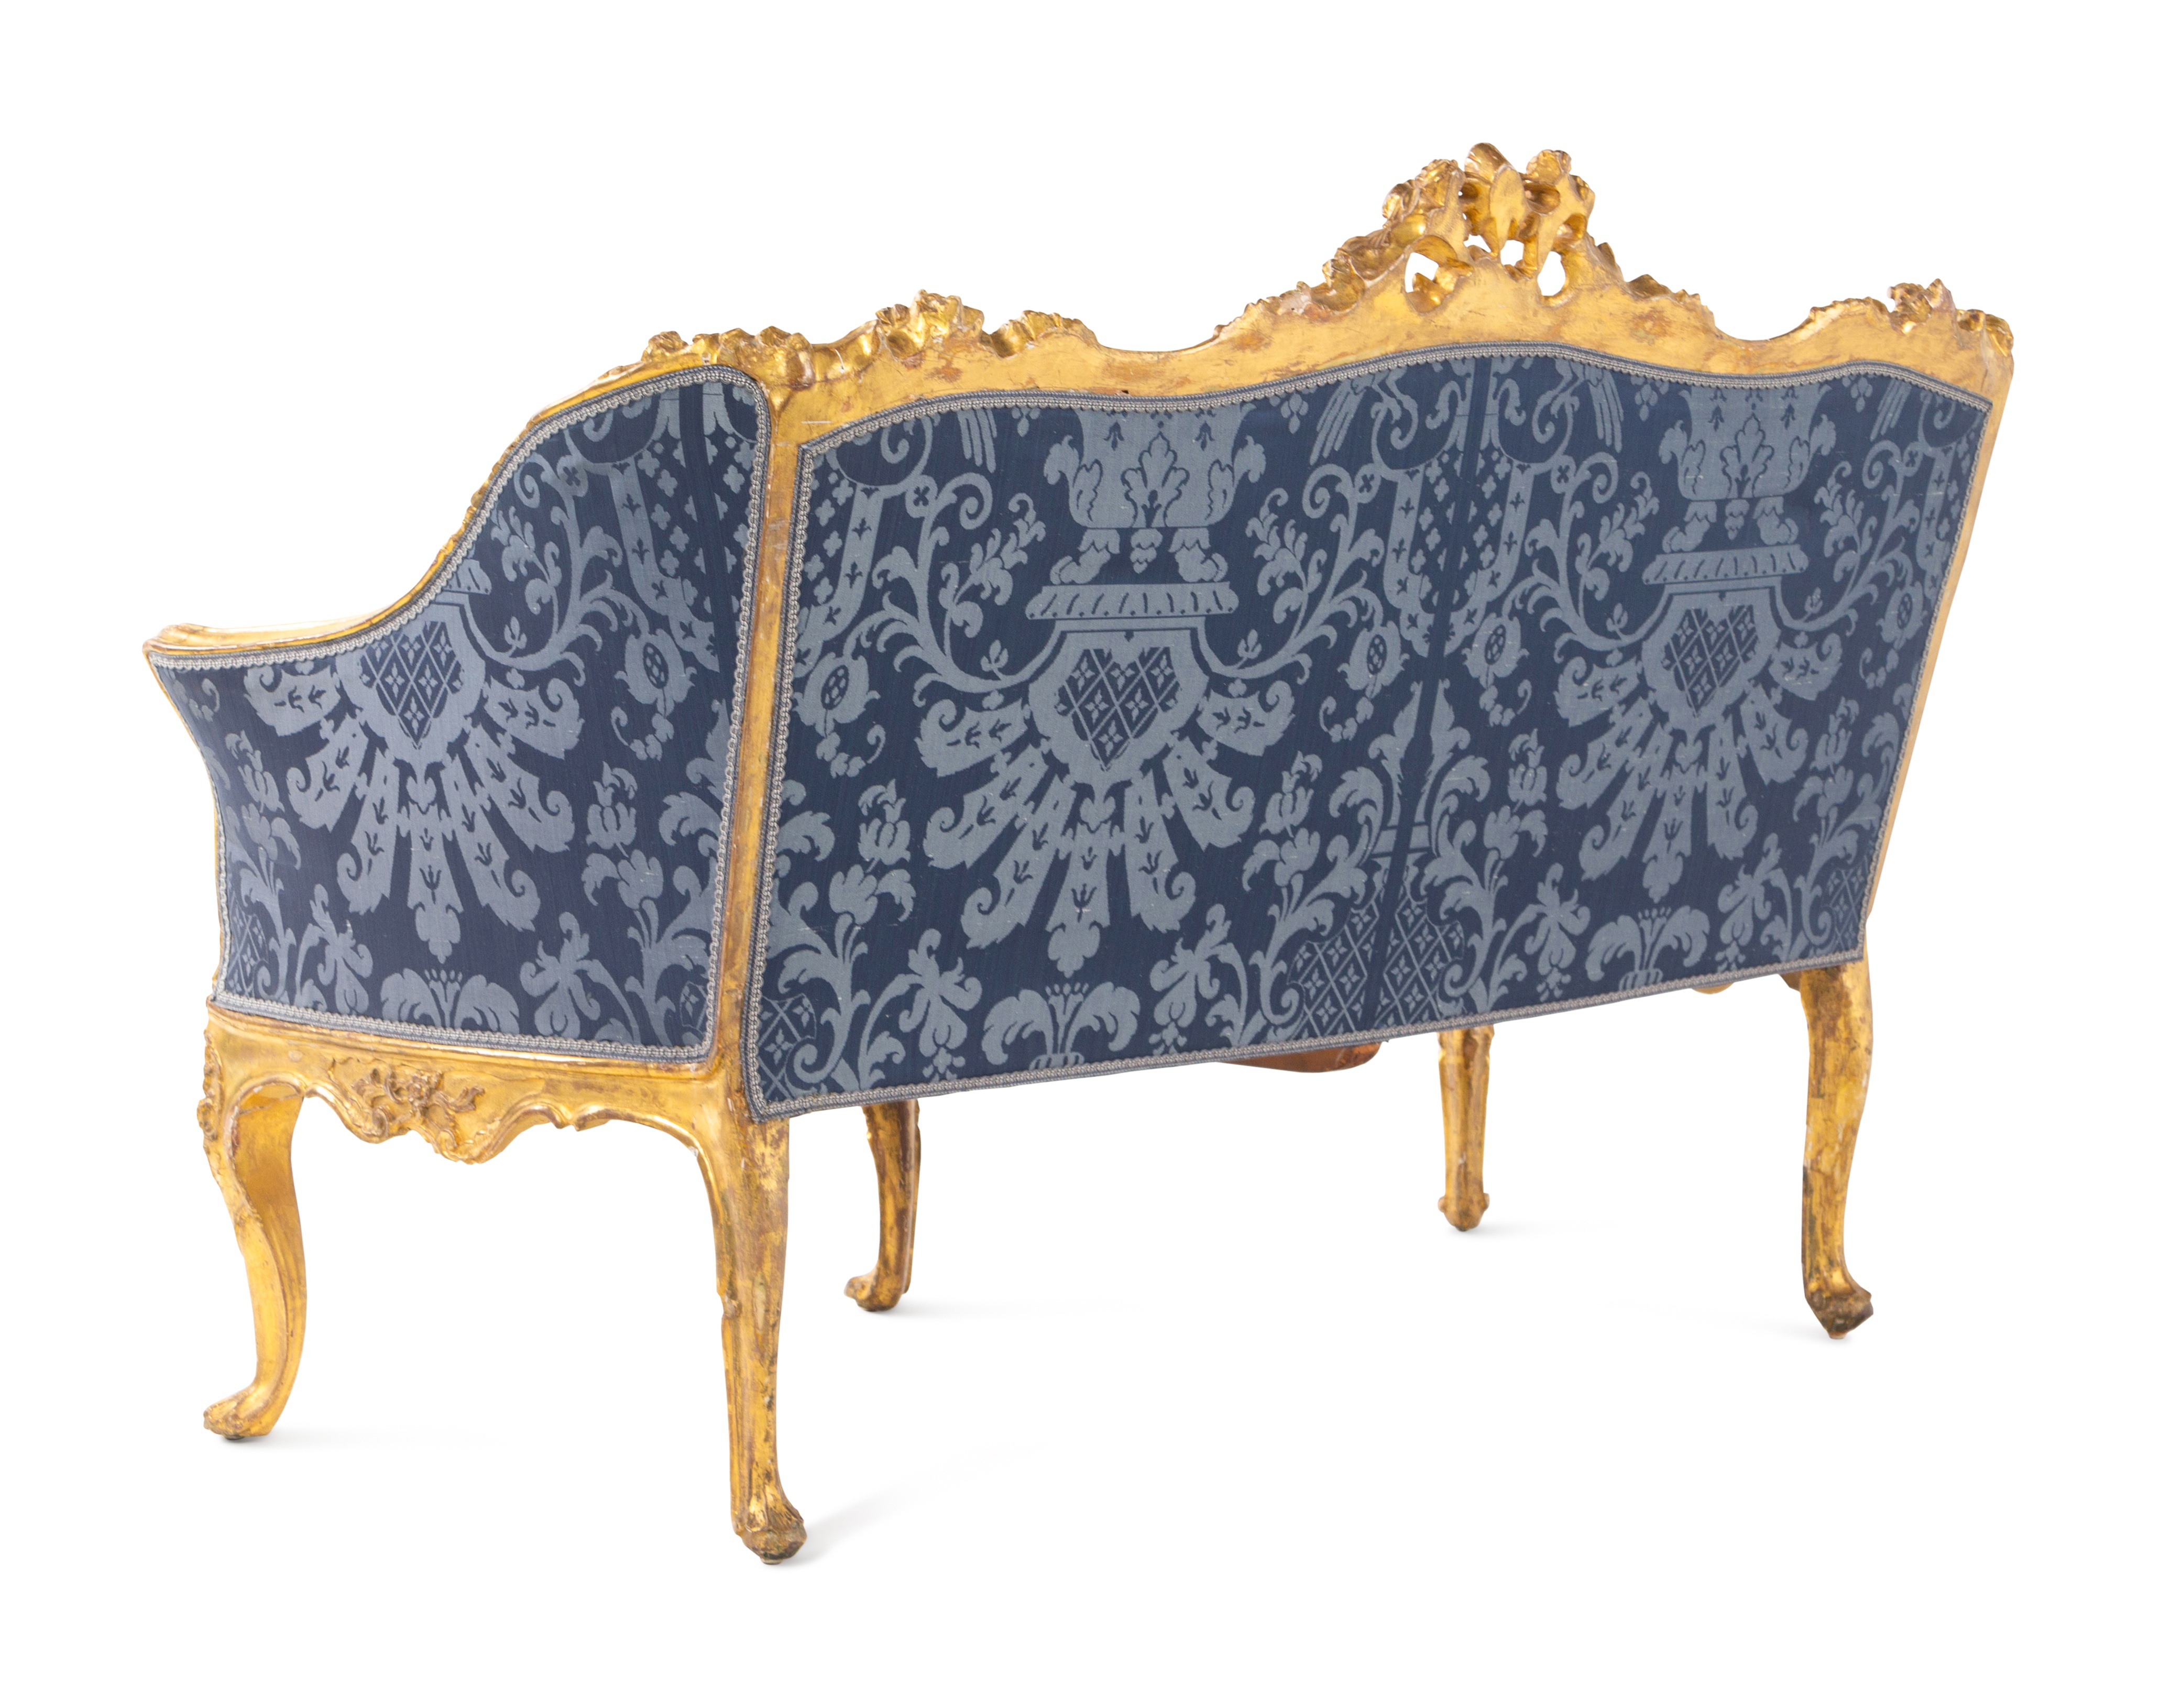 A Continental Giltwood Settee - Image 7 of 7